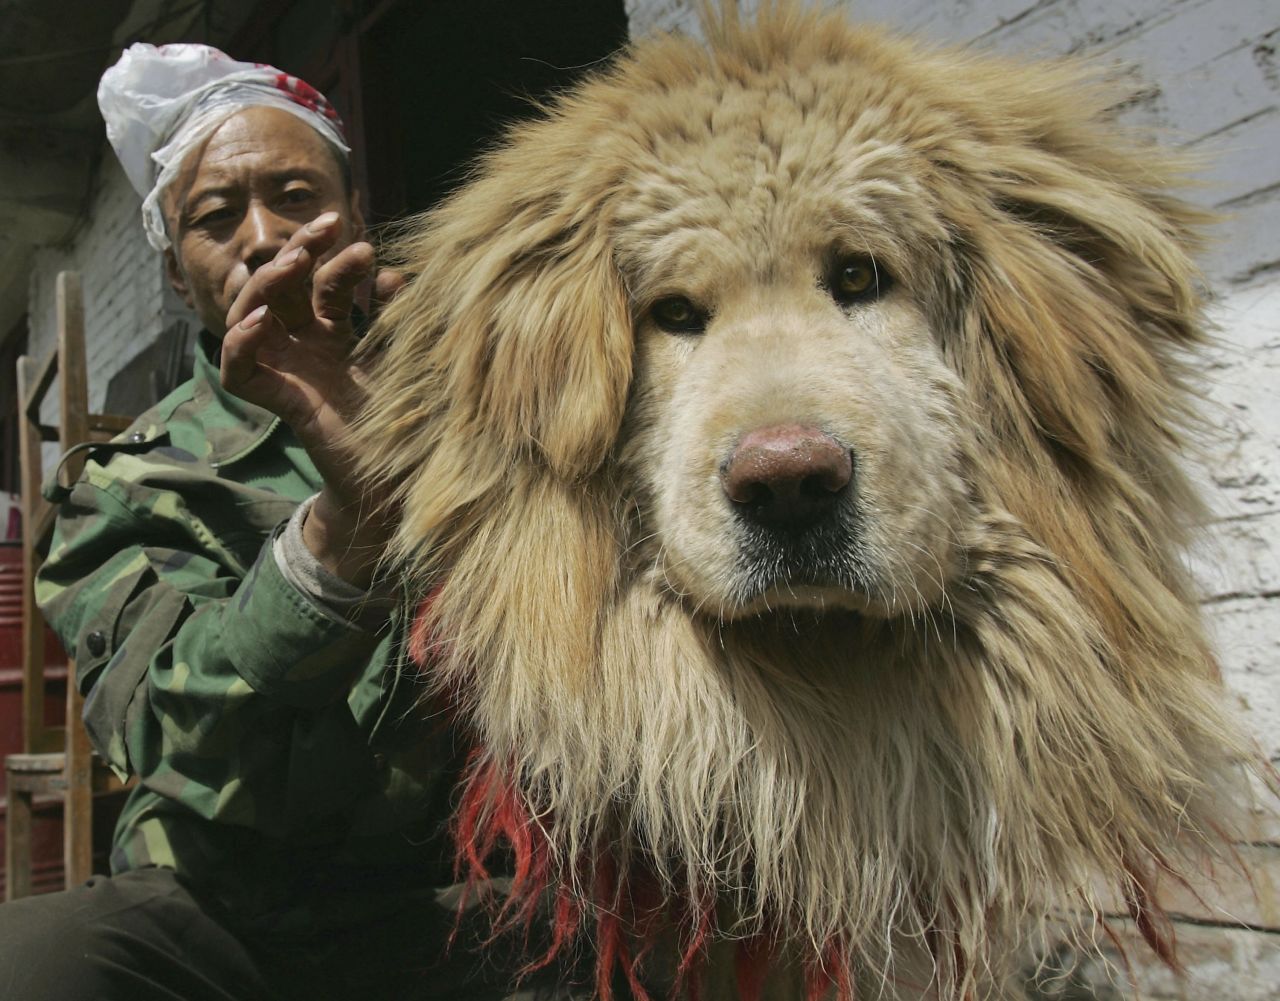  A feeder cleans the hair of a Tibetan Mastiff at Xining Purebred Tibetan Mastiff Breeding Base in Xining, Qinghai Province, China. The breed is in vogue in tropical Hong Kong even though it has been developed for temperatures the rarely rise above 10C. 